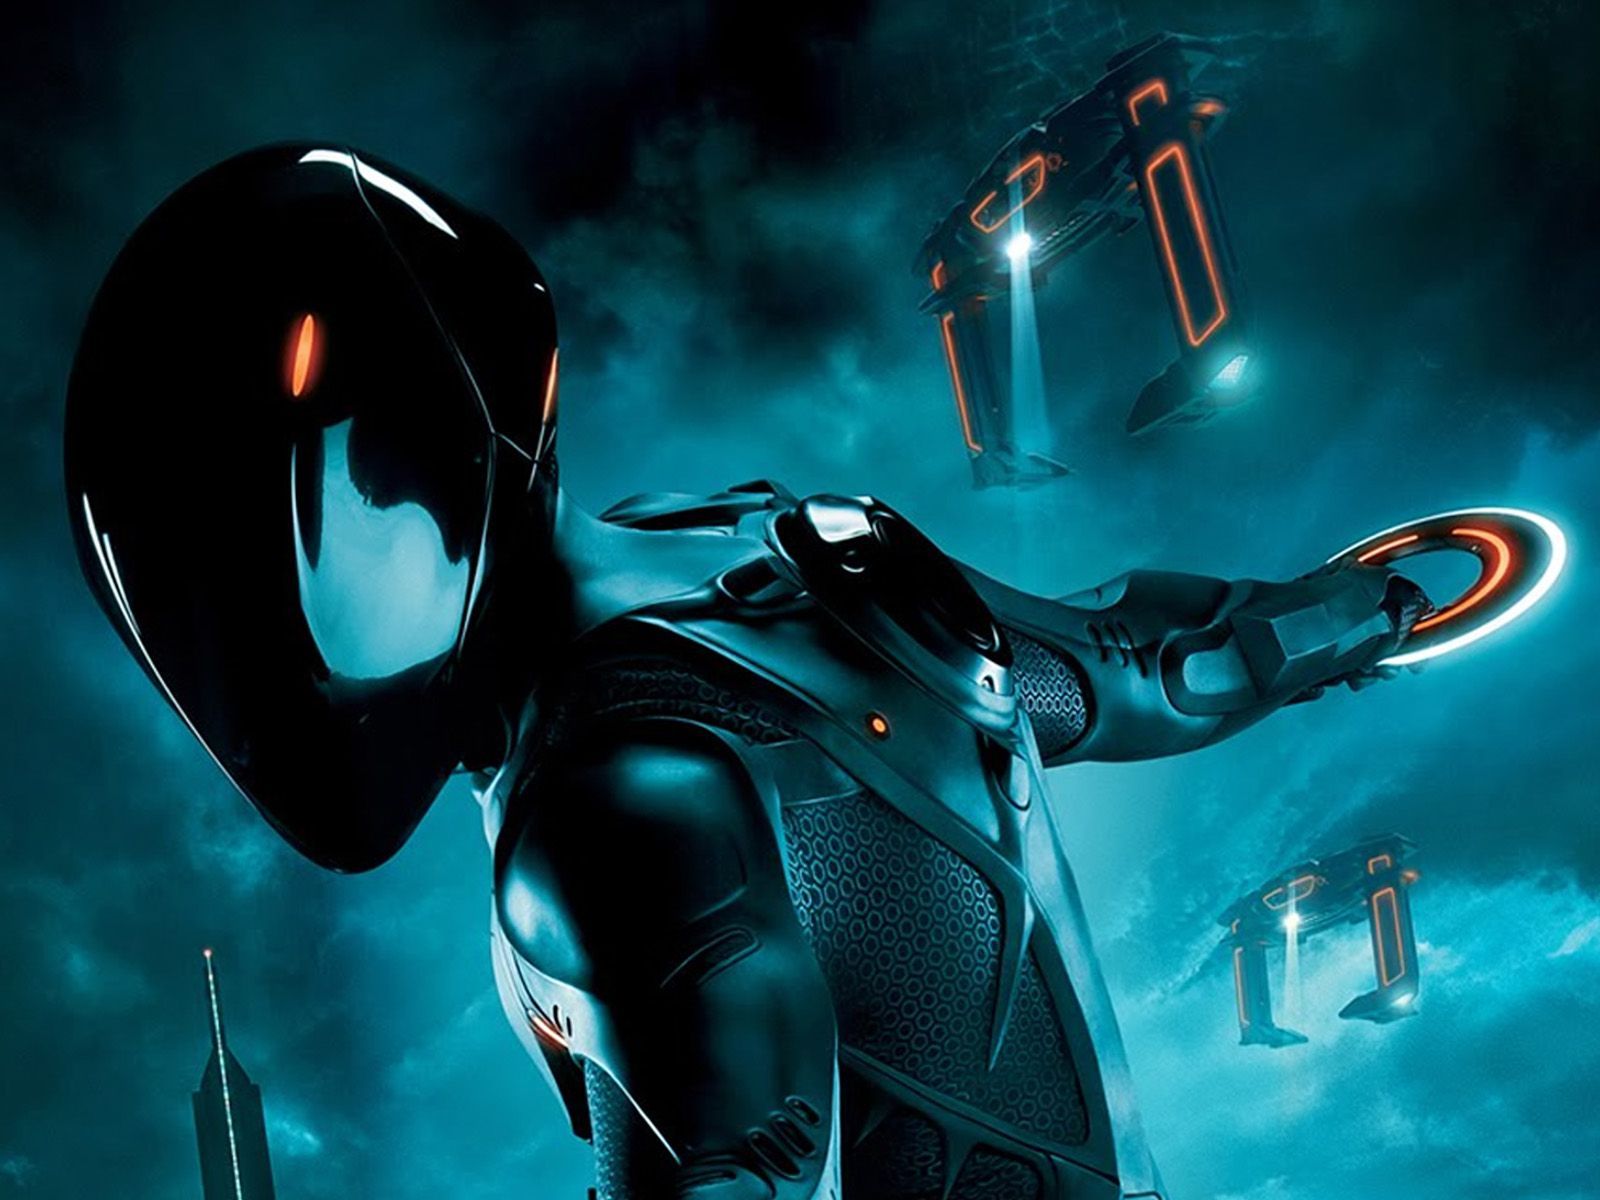 Tron Legacy Wallpapers